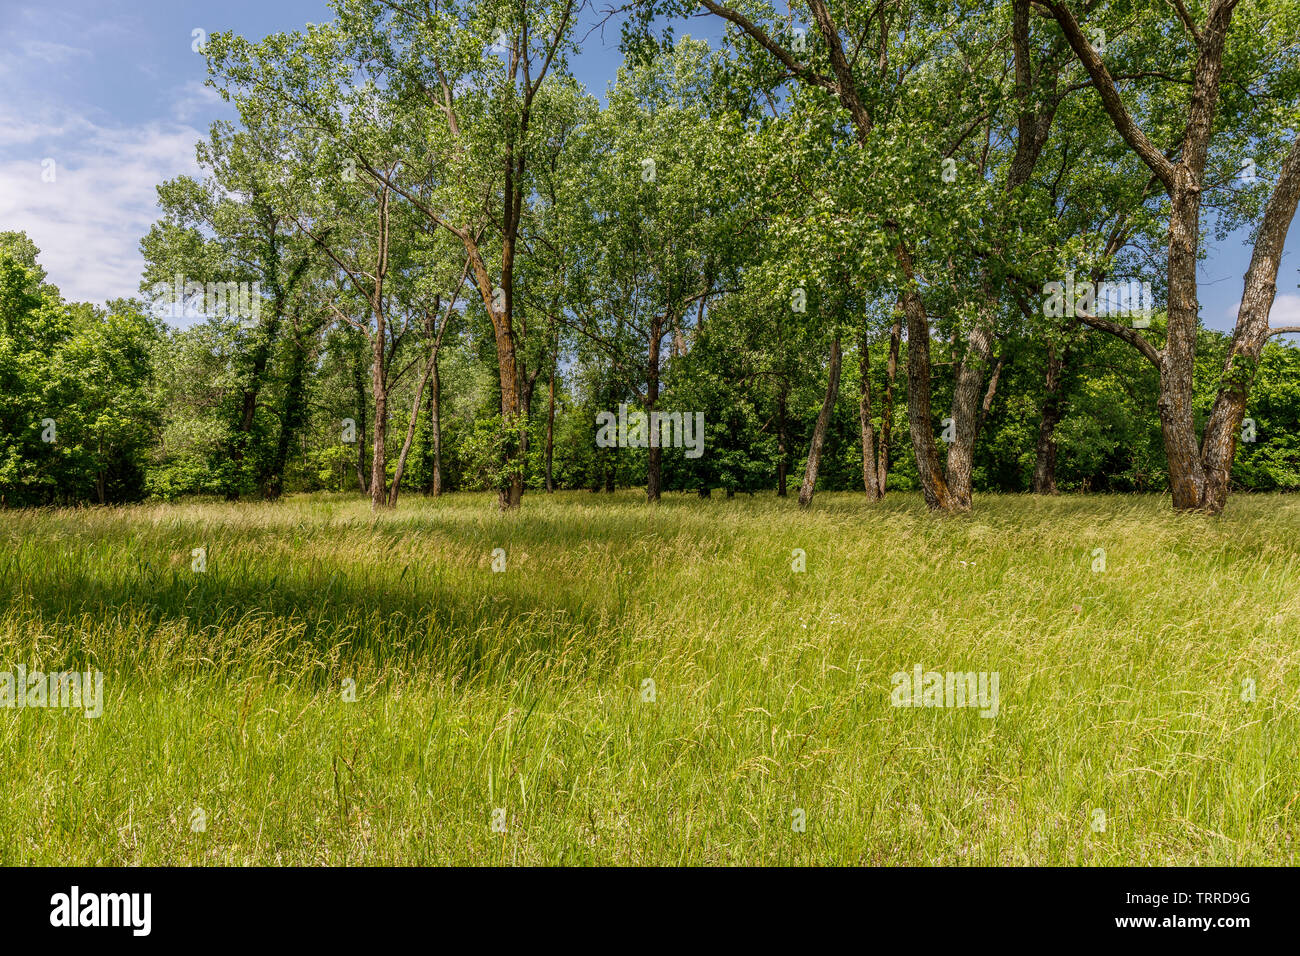 Tall grass in a field. Stock Photo